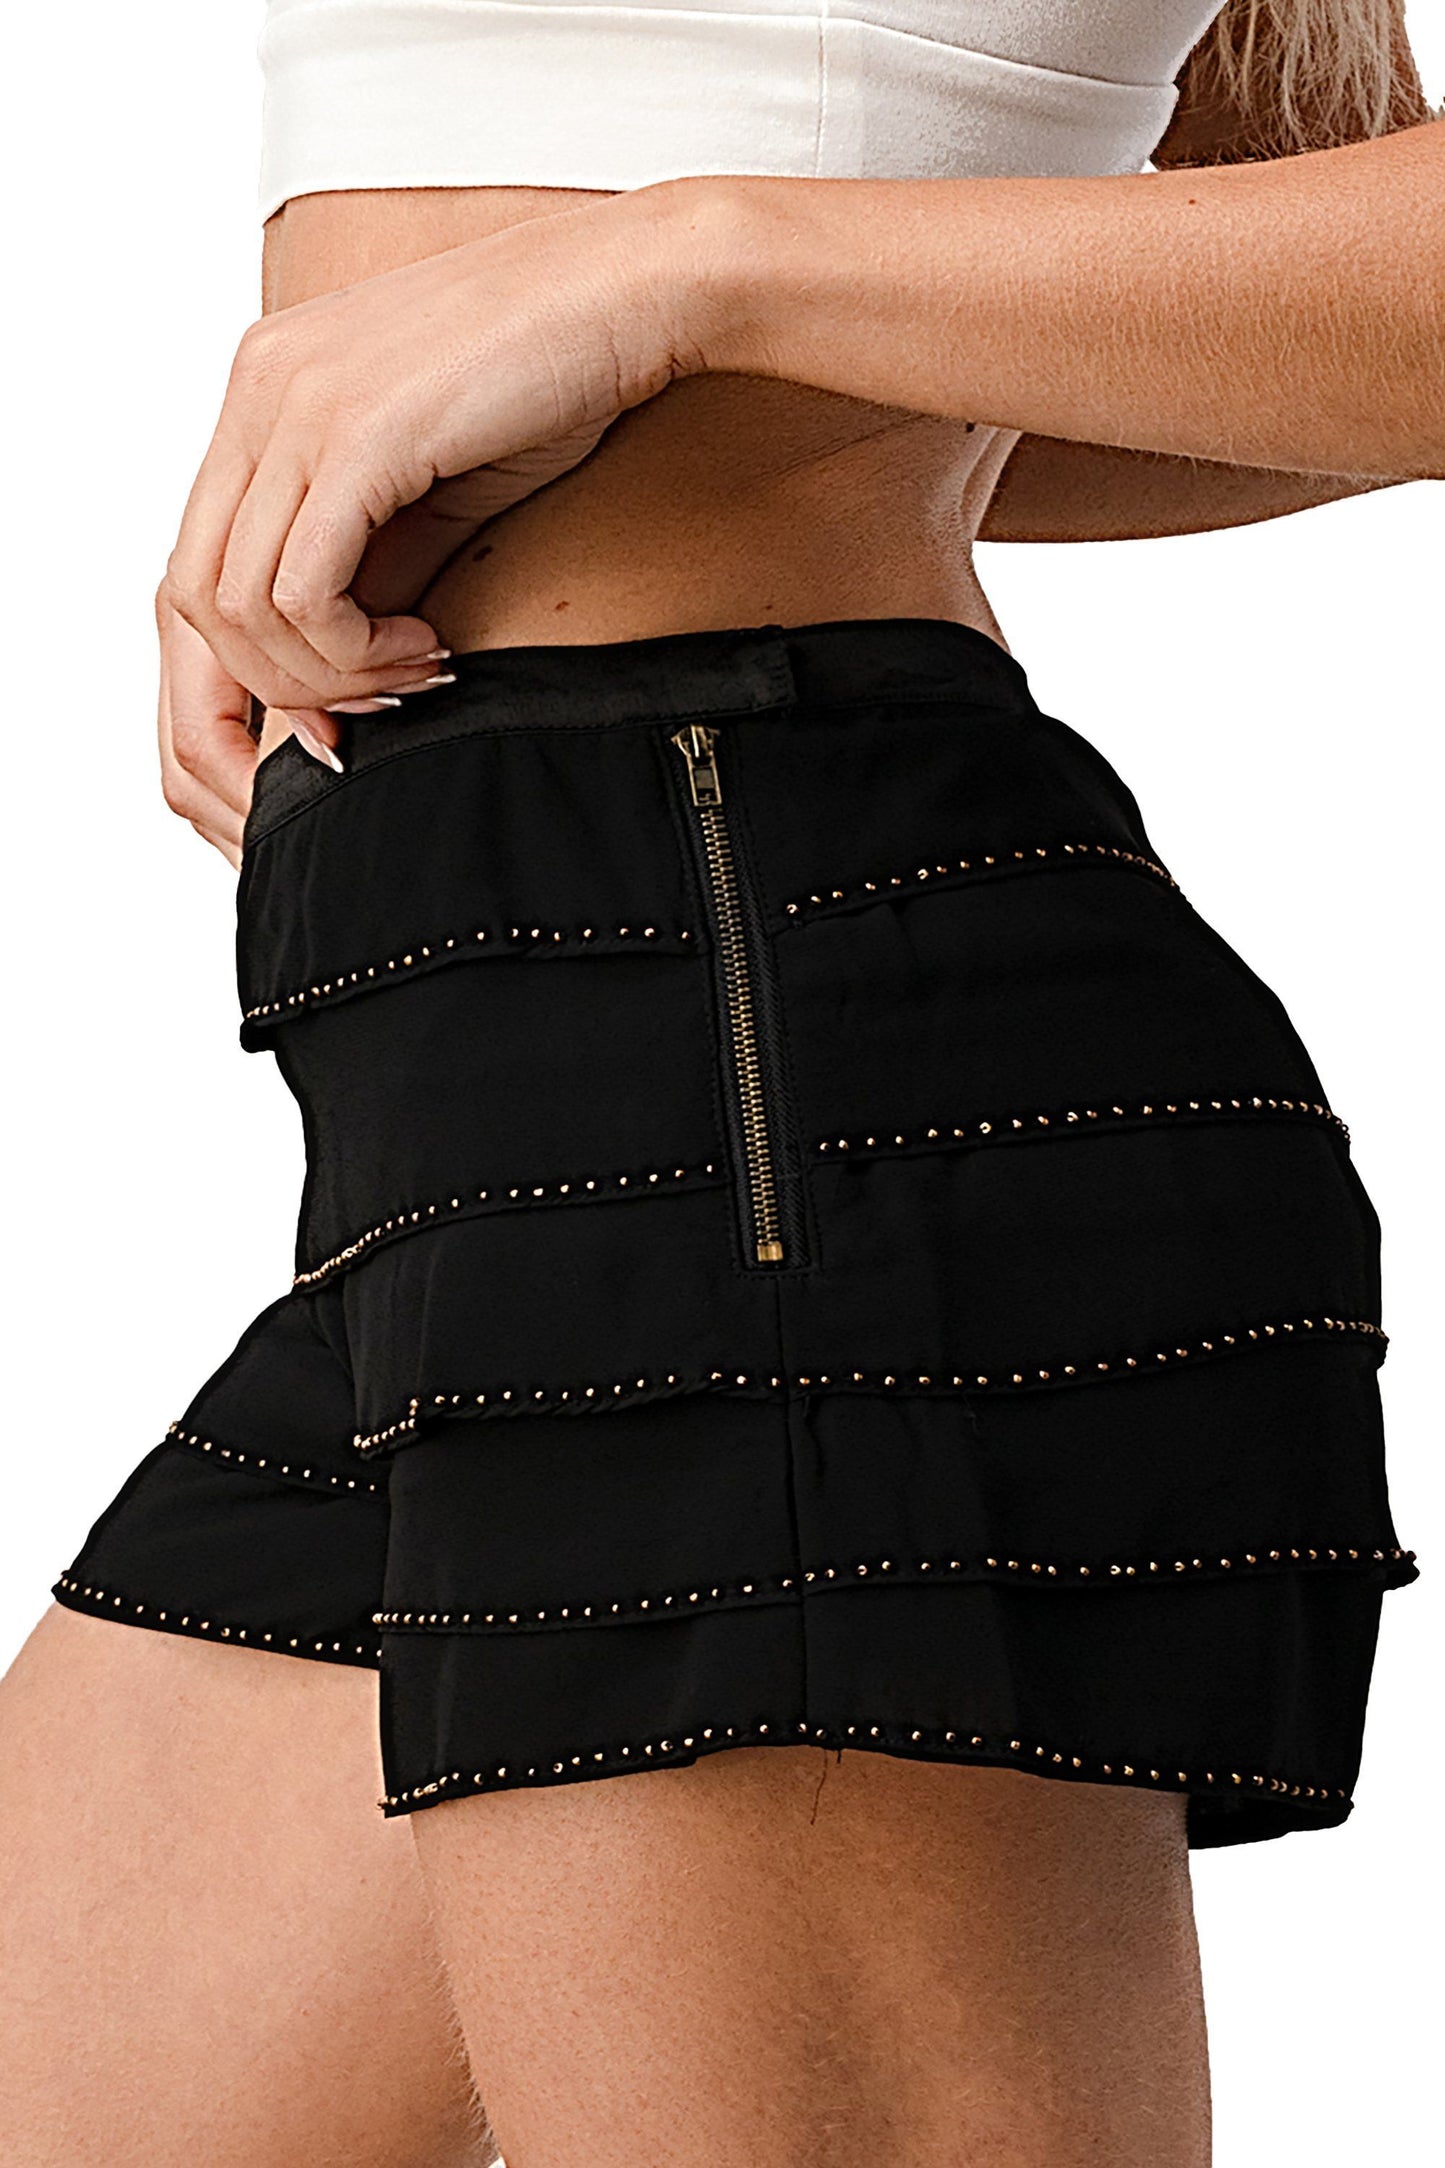 Picture of a Plain Women's Beaded Scallop Layered Hem Shorts black close up side view